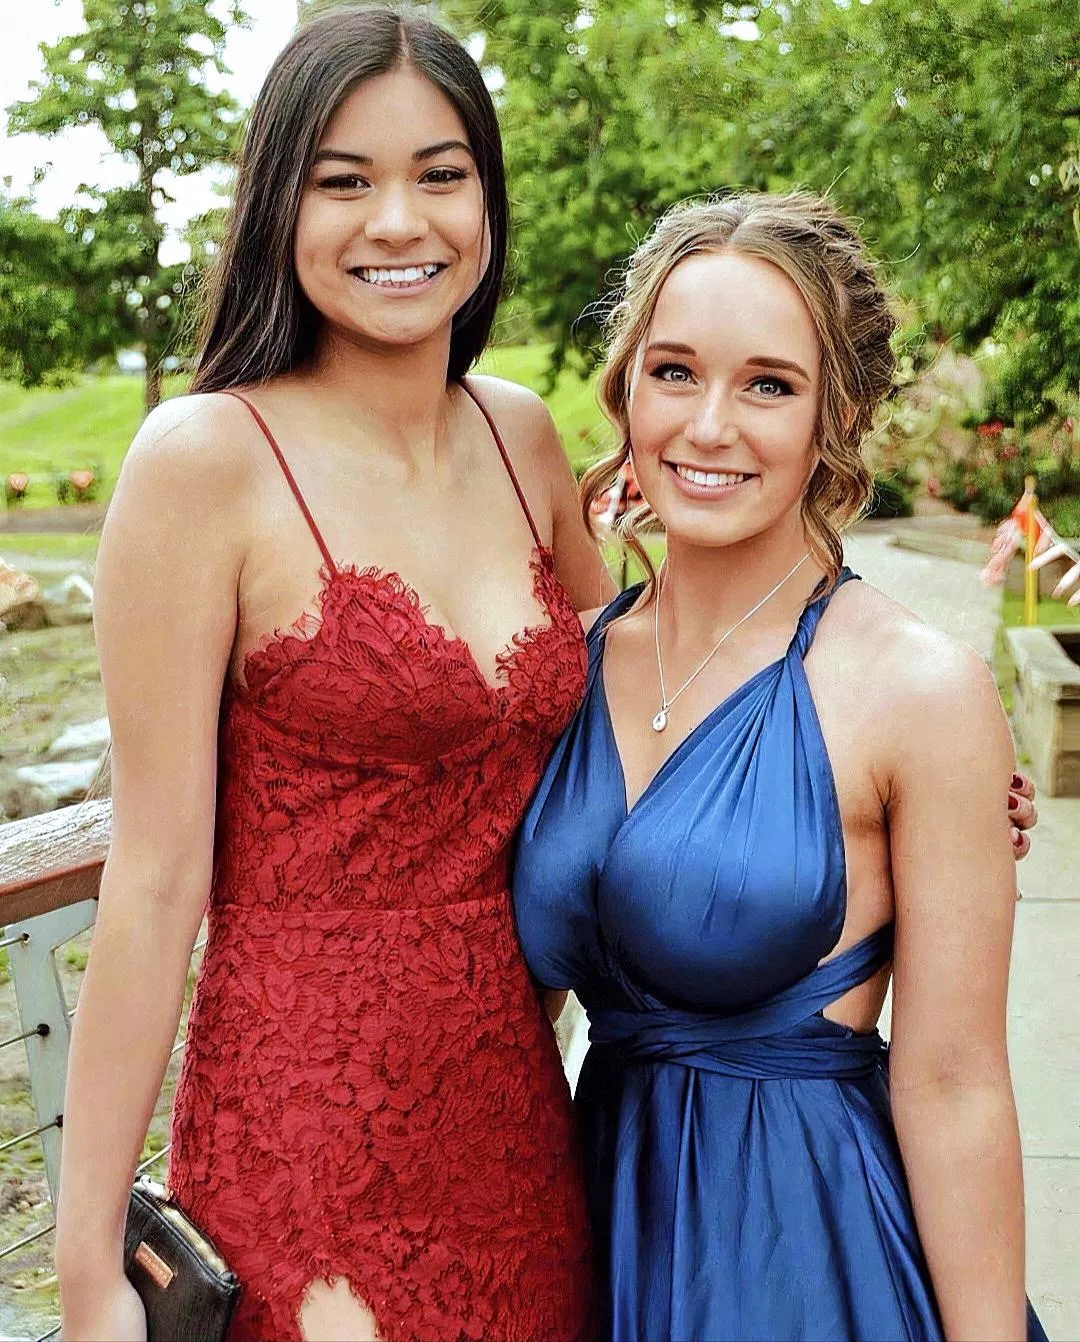 This is a photo of my best friend's niece(blue prom dress), she's with her  best friend about to go to promðŸ’¯ðŸ”¥ðŸ‘ Please rank her and her best friend  from the most attractive